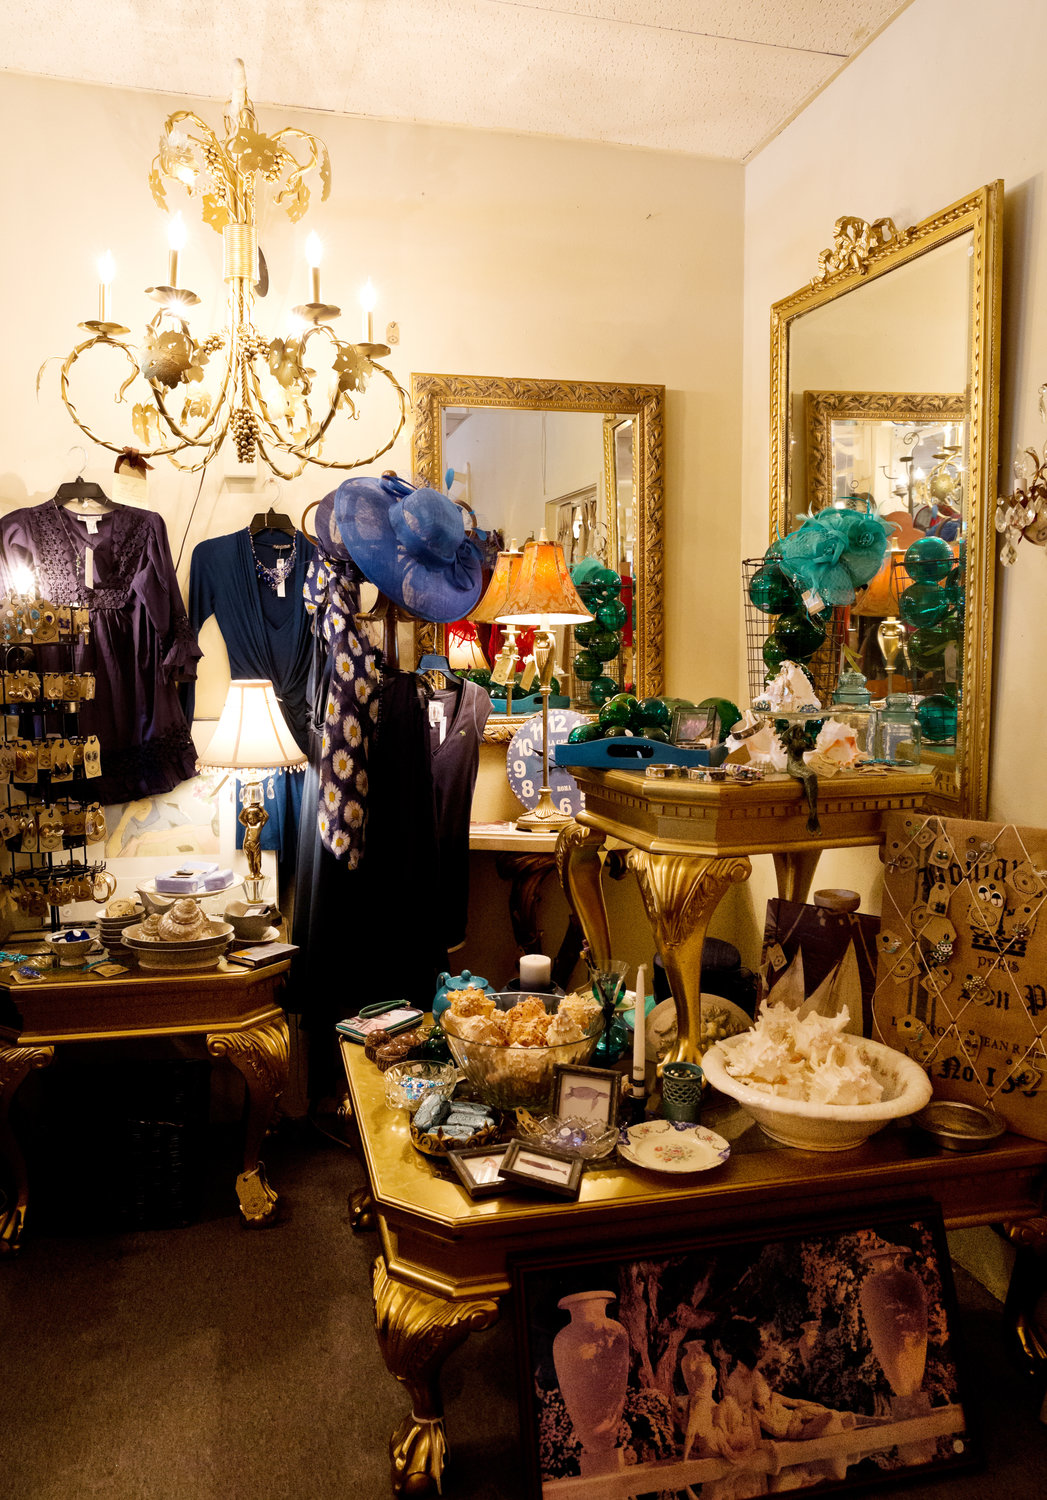 Shopping at antique shops and consignment stores is one way consumers can reduce and reuse.